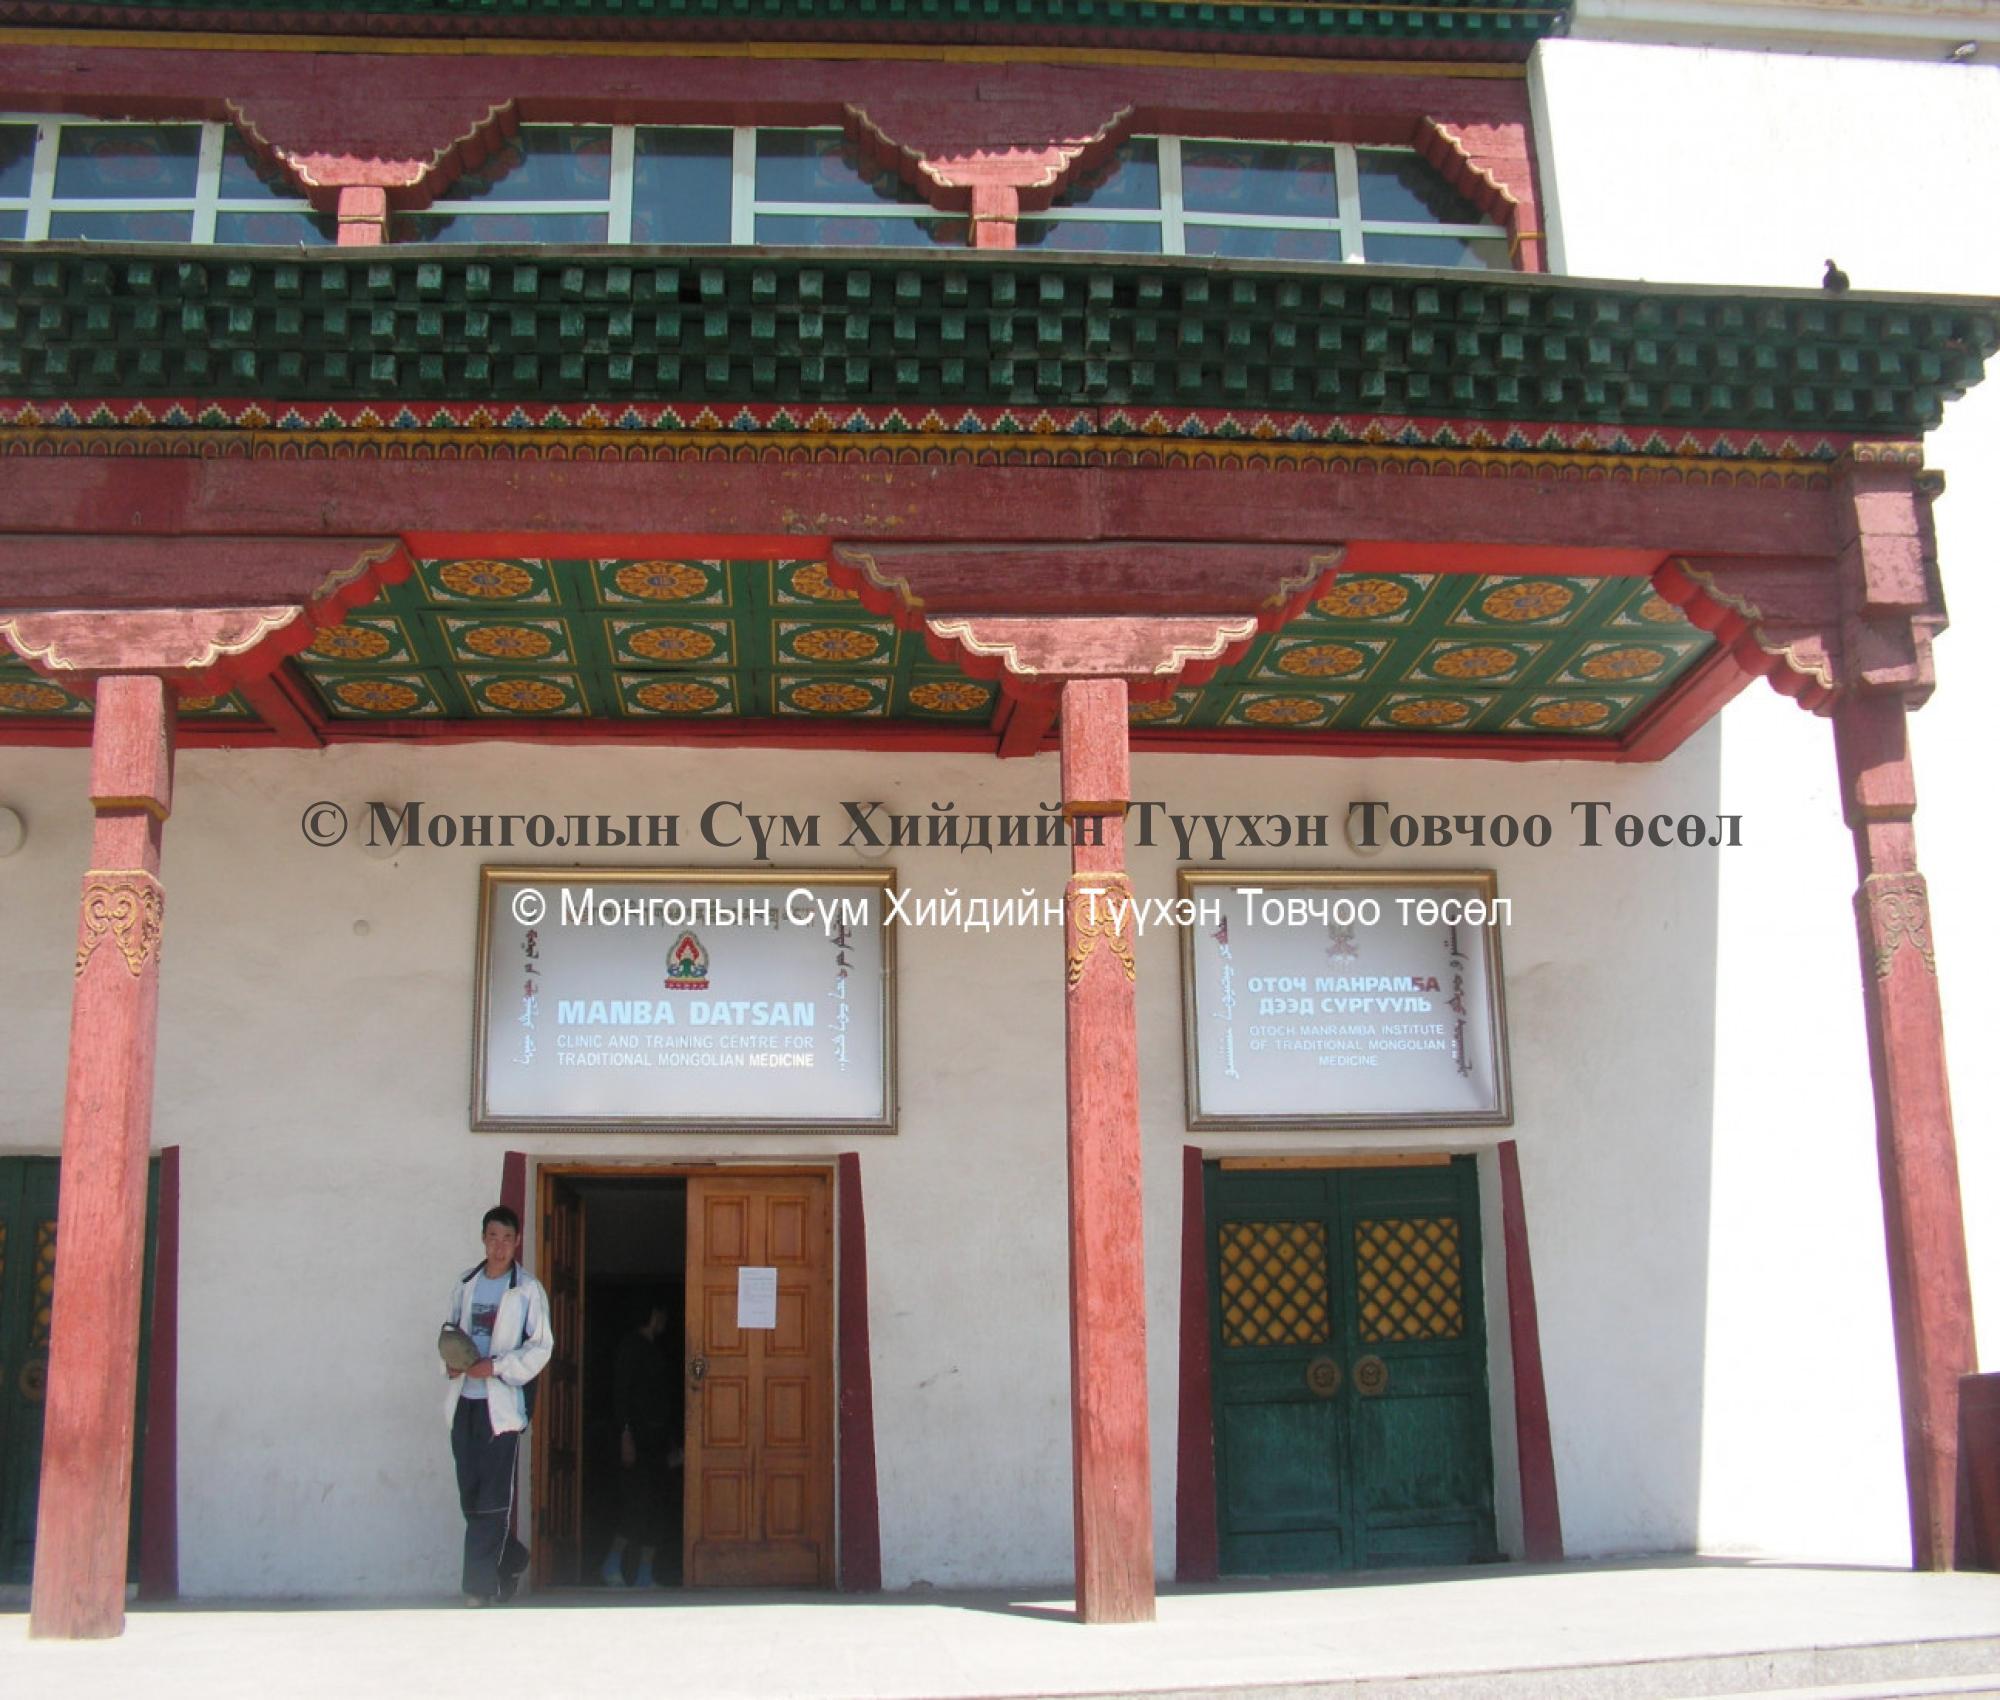 Entrance of the temple